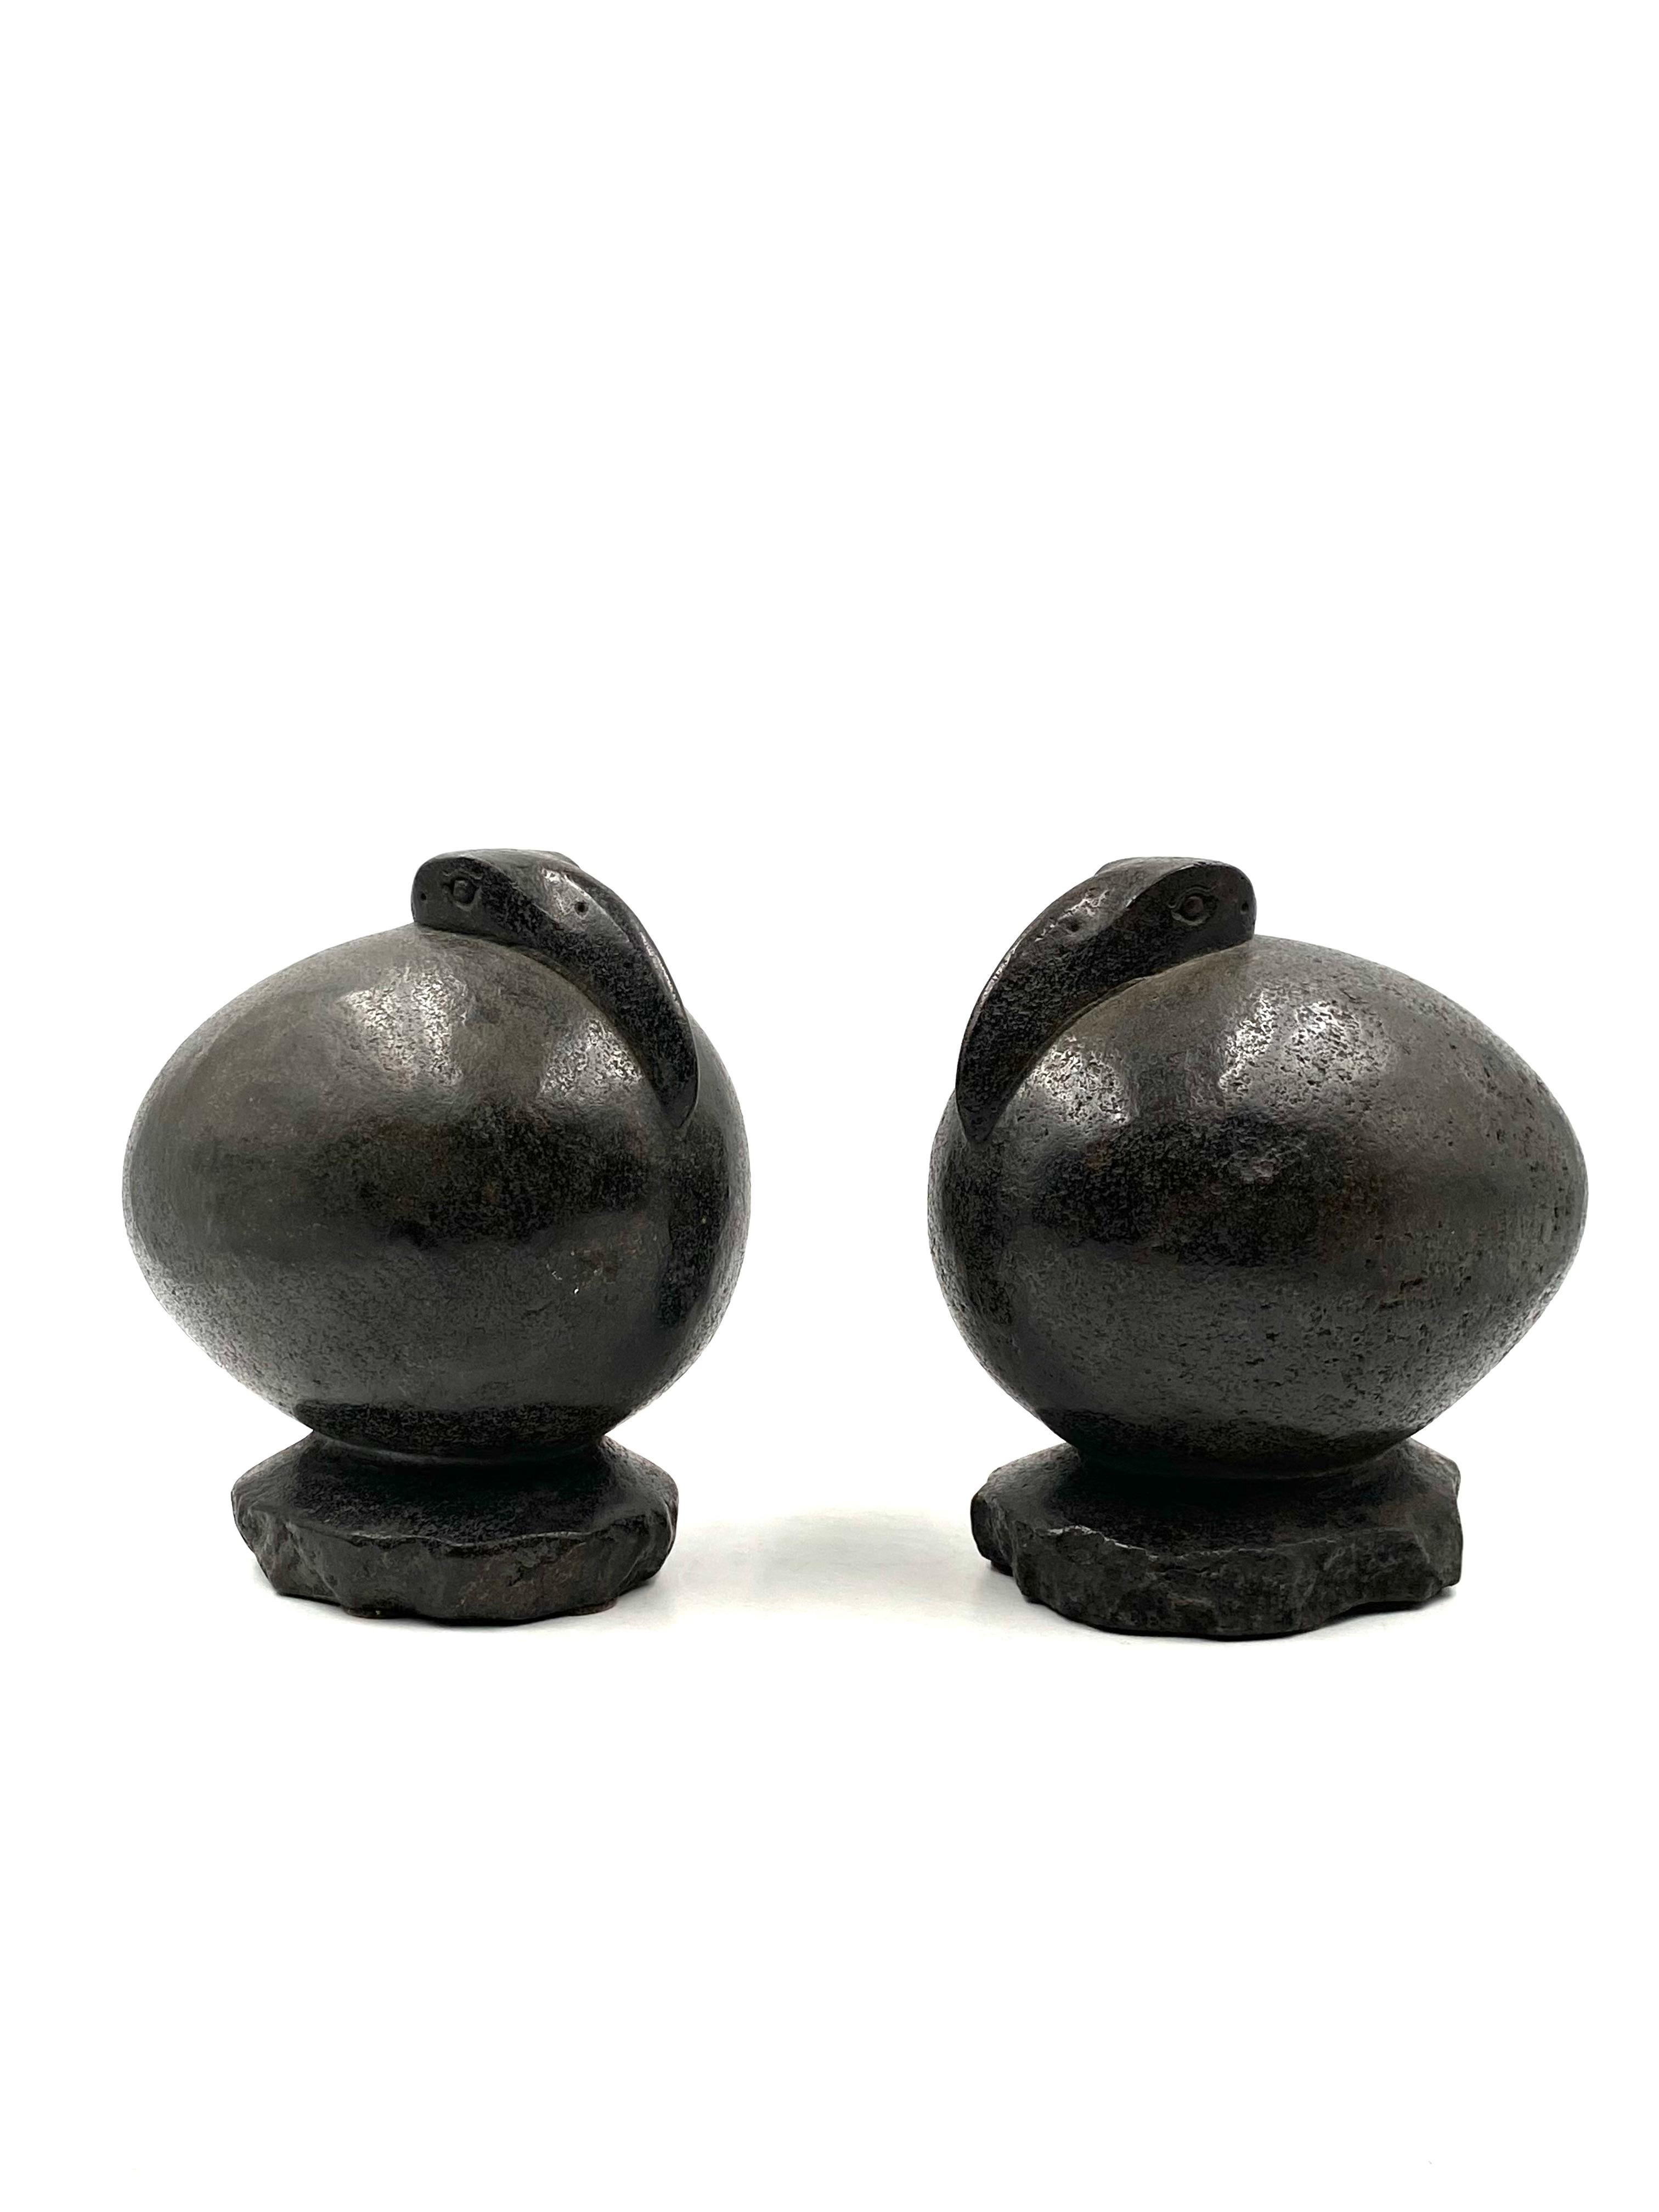 Ibis Birds, Pair of Basalt Ovoid Sculptures, France Early 20th Century 7